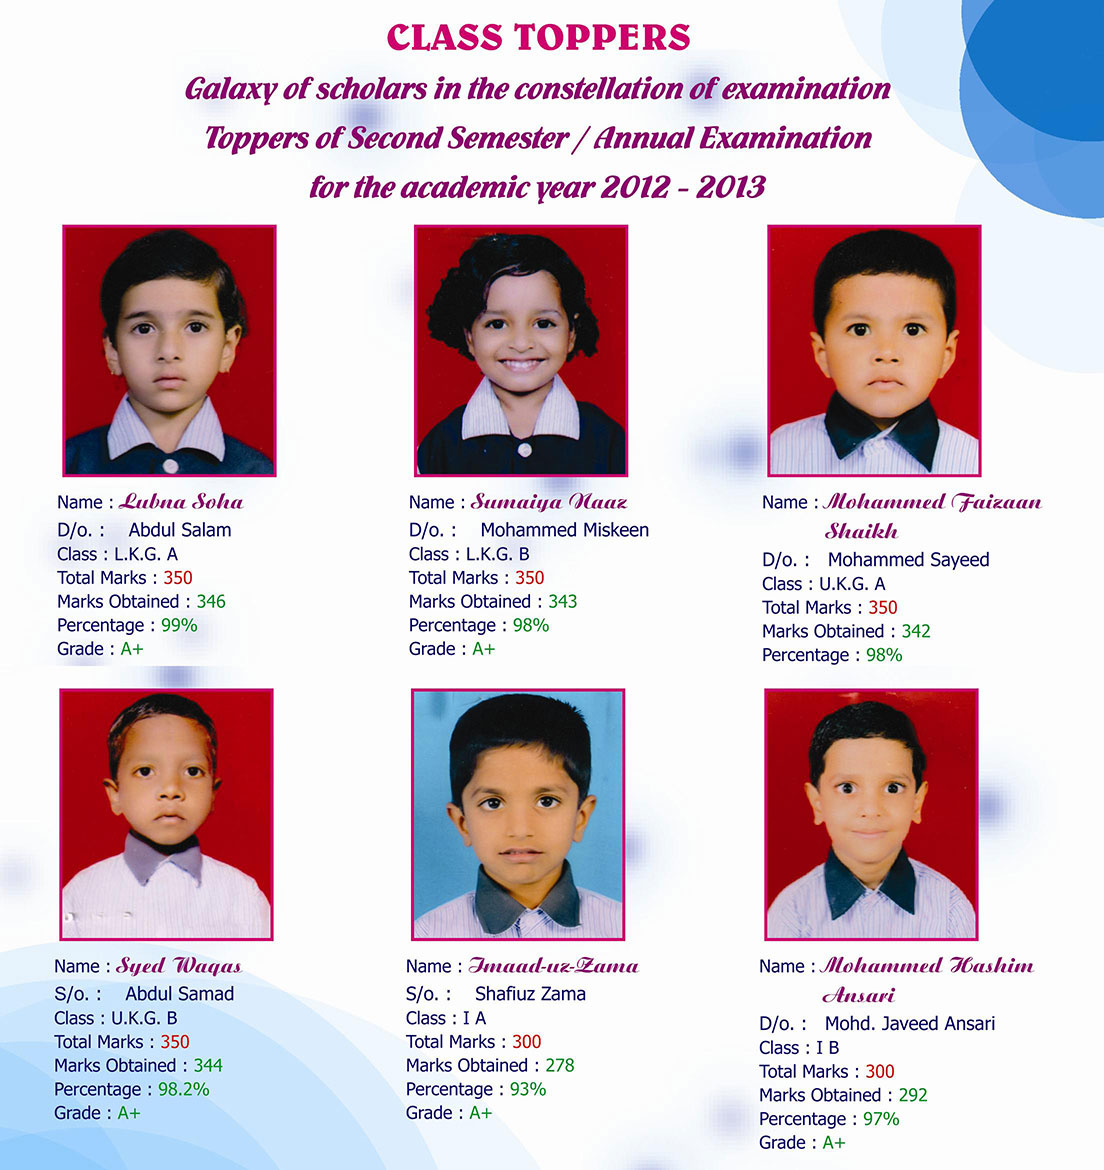 Topper of Second Semester / Annual Examination for the academic year 2012-2013